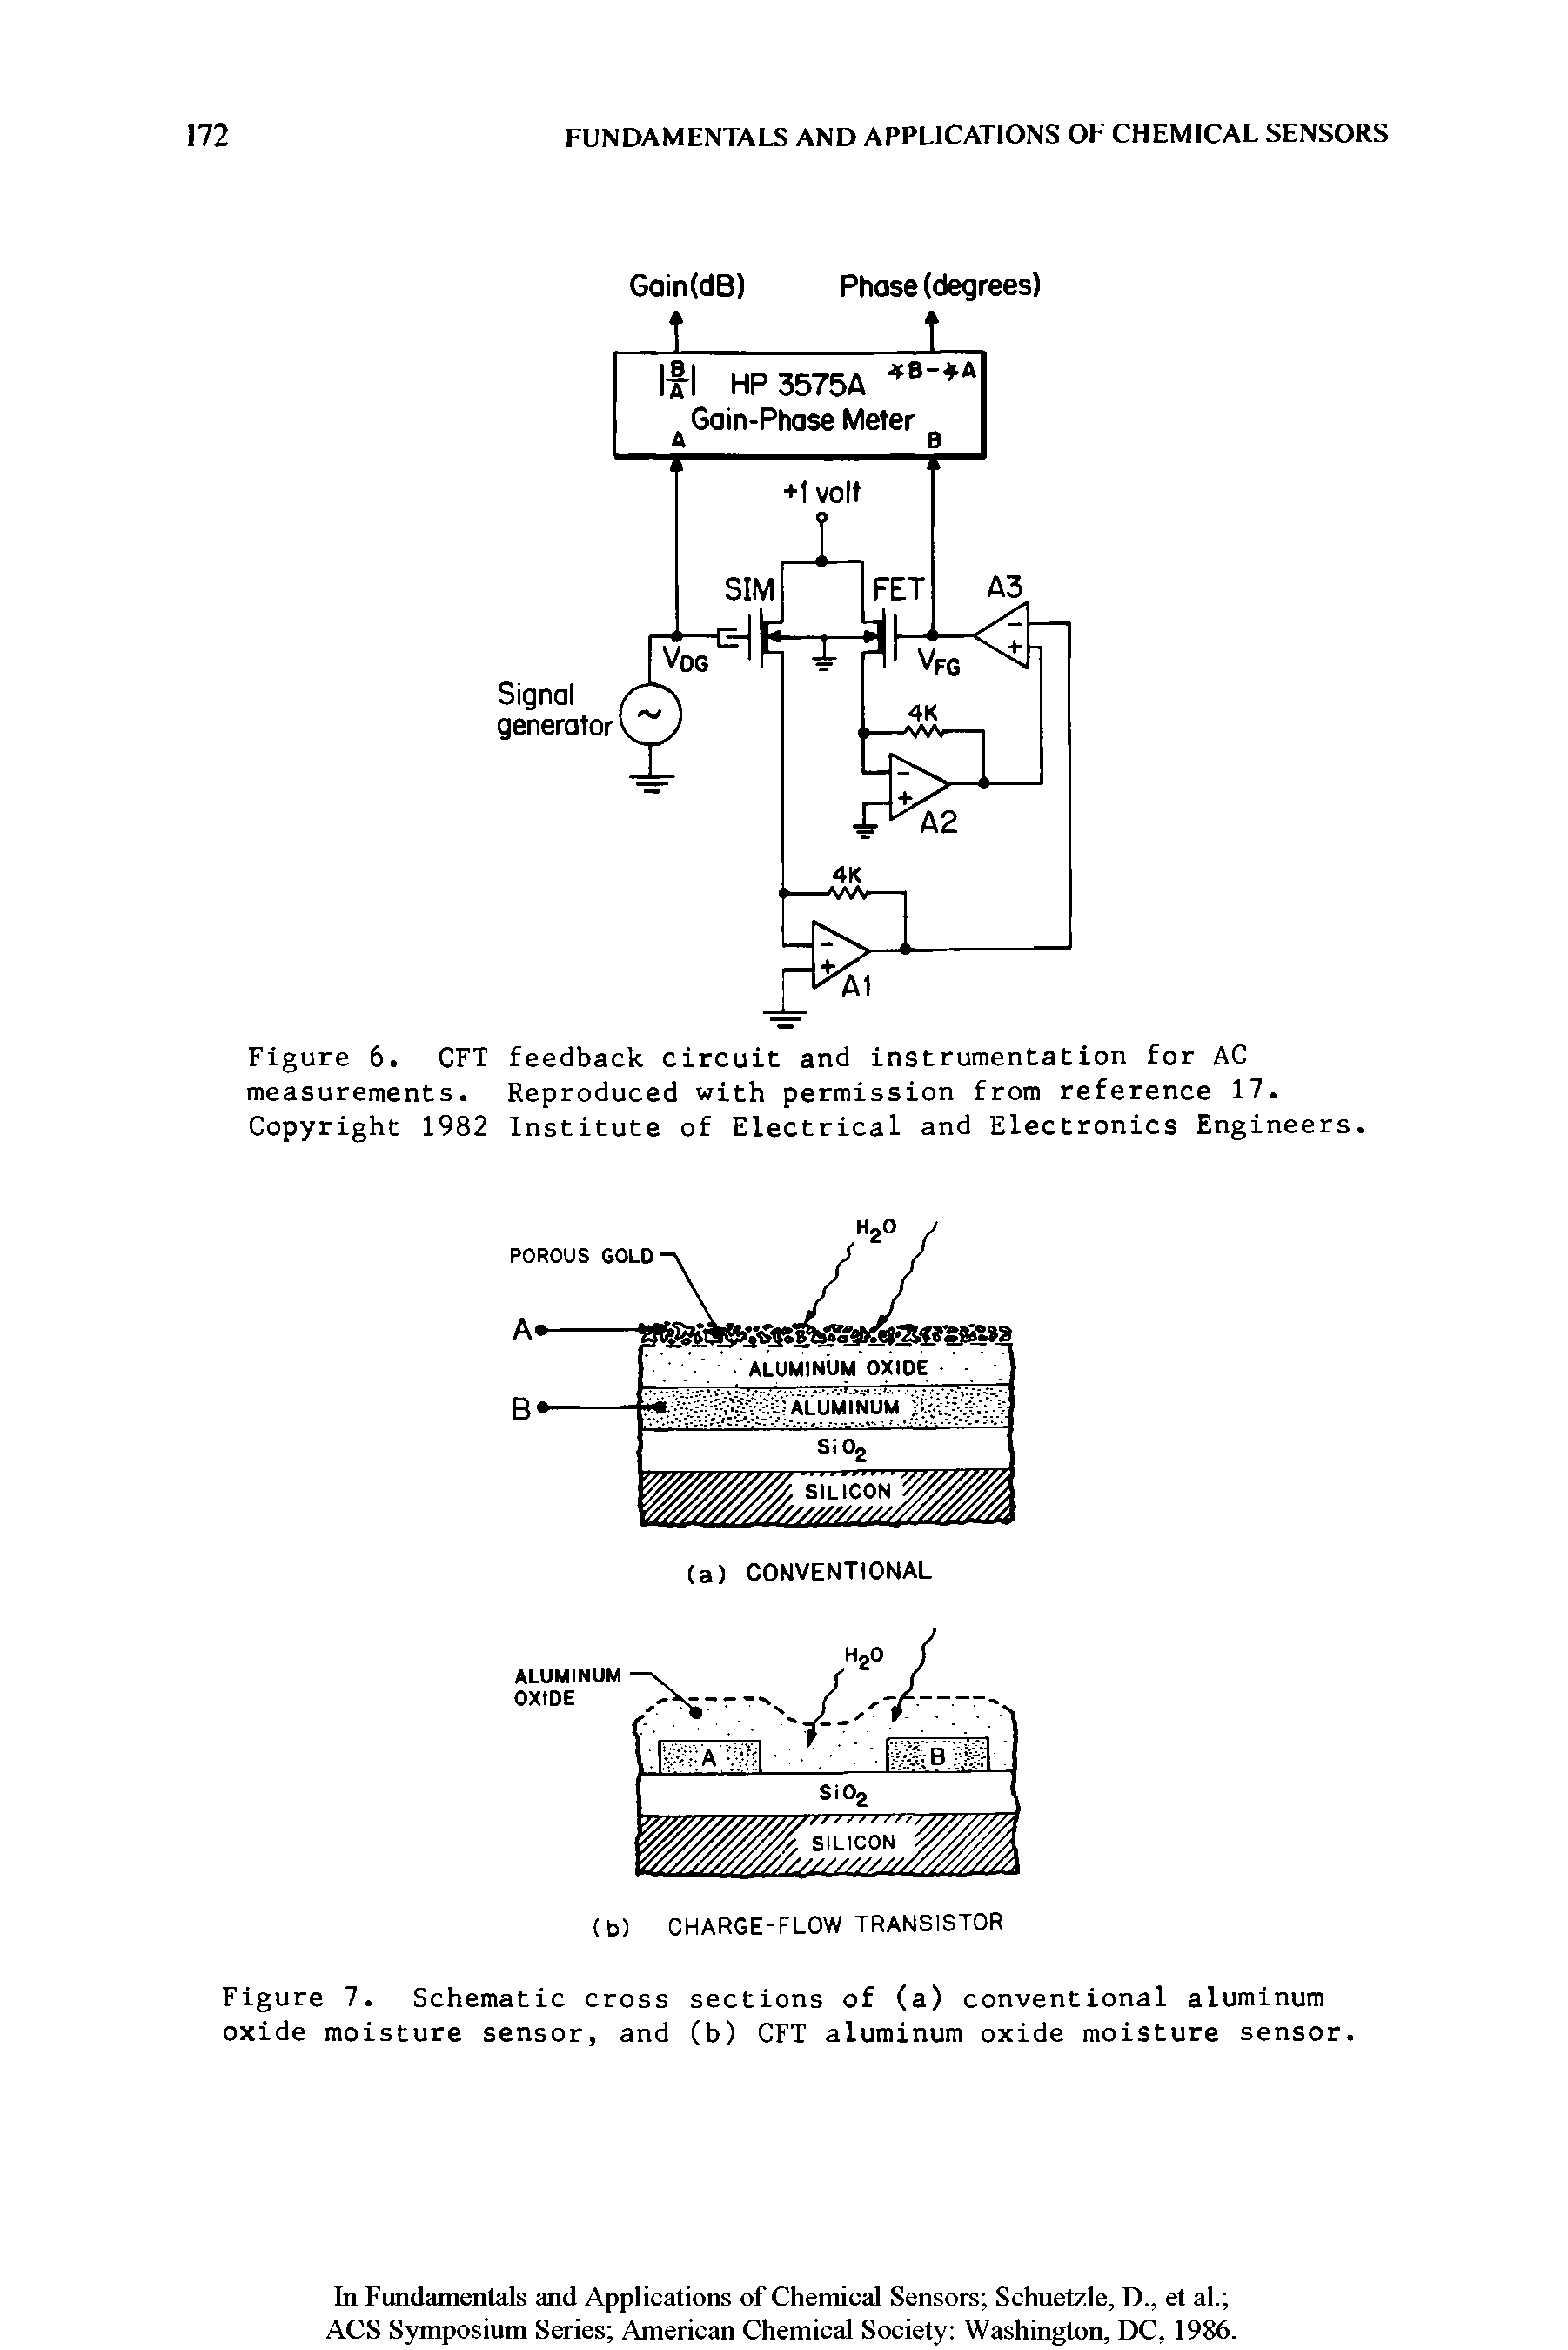 Figure 6. CFT feedback circuit and instrumentation for AC measurements. Reproduced with permission from reference 17. Copyright 1982 Institute of Electrical and Electronics Engineers.